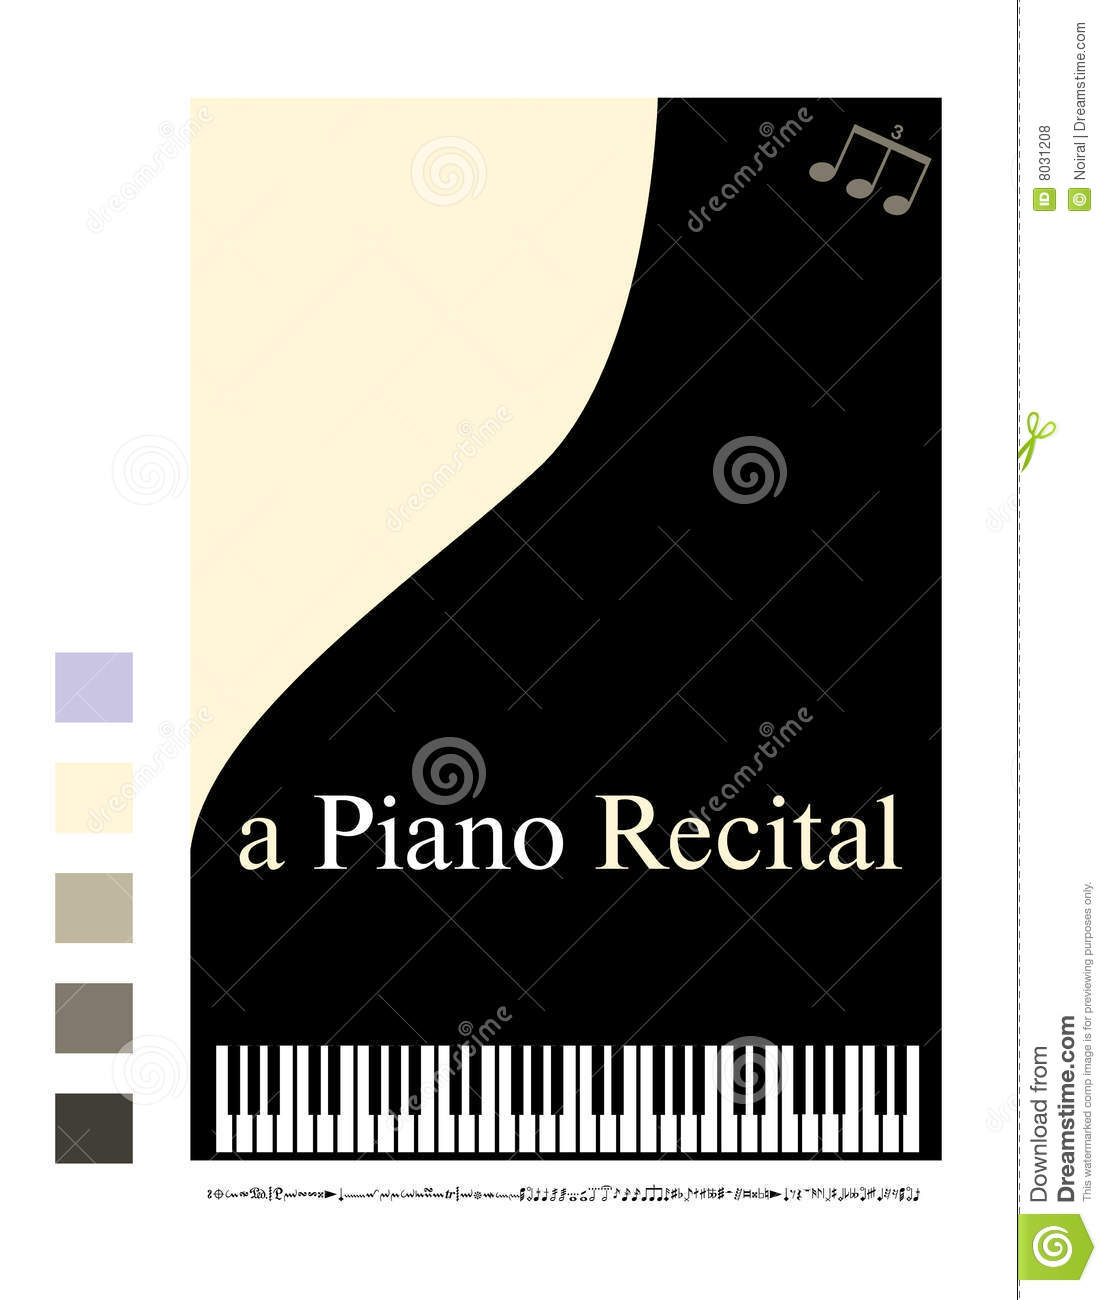 Poster For A Piano Recital Royalty Free Stock Photos   Image  8031208